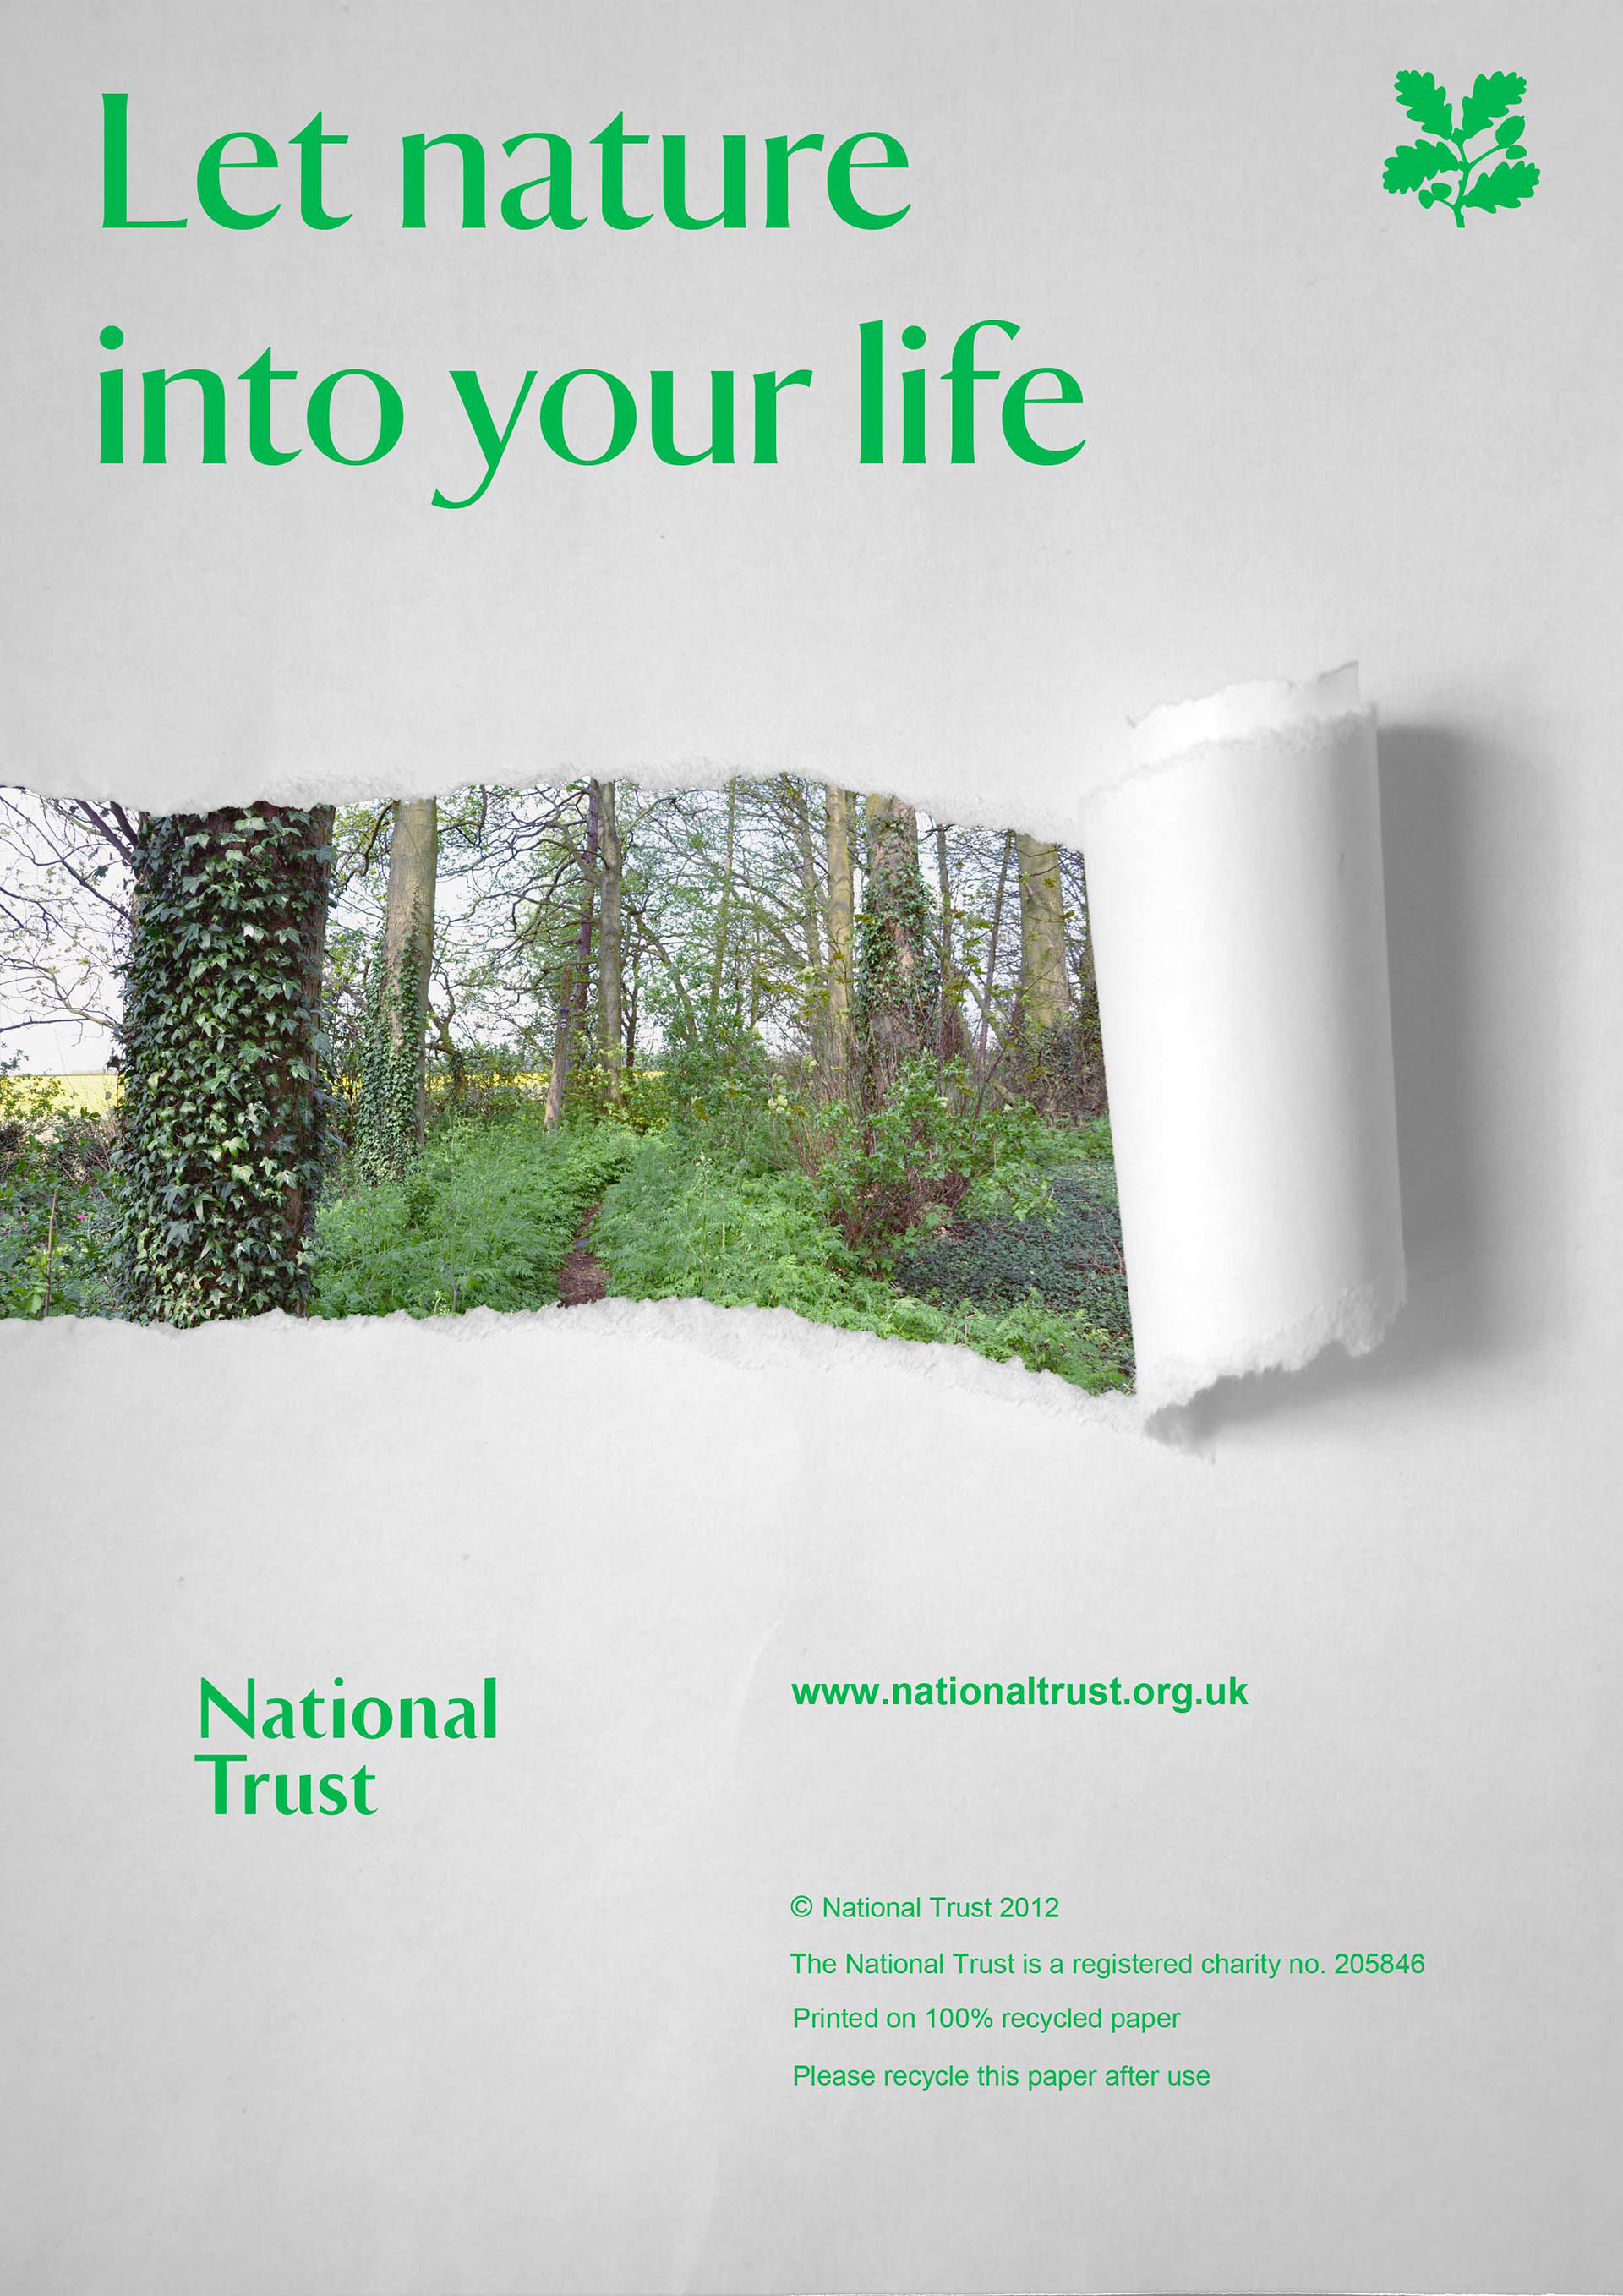 Poster campaign for National Trust, Let nature into your life